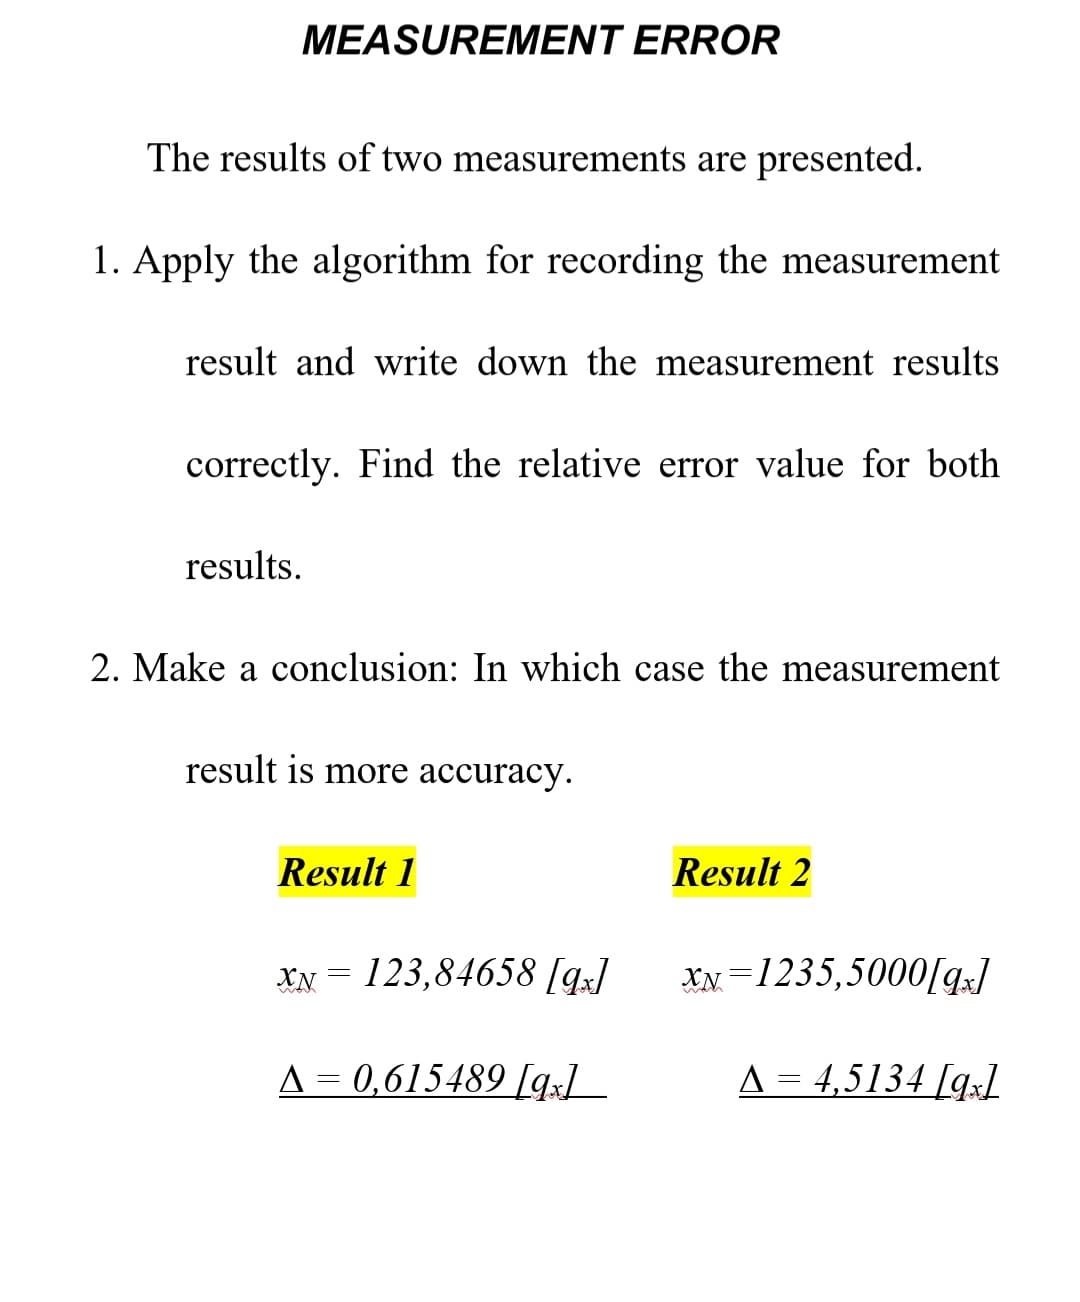 MEASUREMENT ERROR
The results of two measurements are presented.
1. Apply the algorithm for recording the measurement
result and write down the measurement results
correctly. Find the relative error value for bo
results.
2. Make a conclusion: In which case the measurement
result is more accuracy.
Result 1
XN123,84658 [qx]
▲ = 0,615489 [9]
Result 2
XN-1235,5000[qx]
A = 4,5134 [qx1